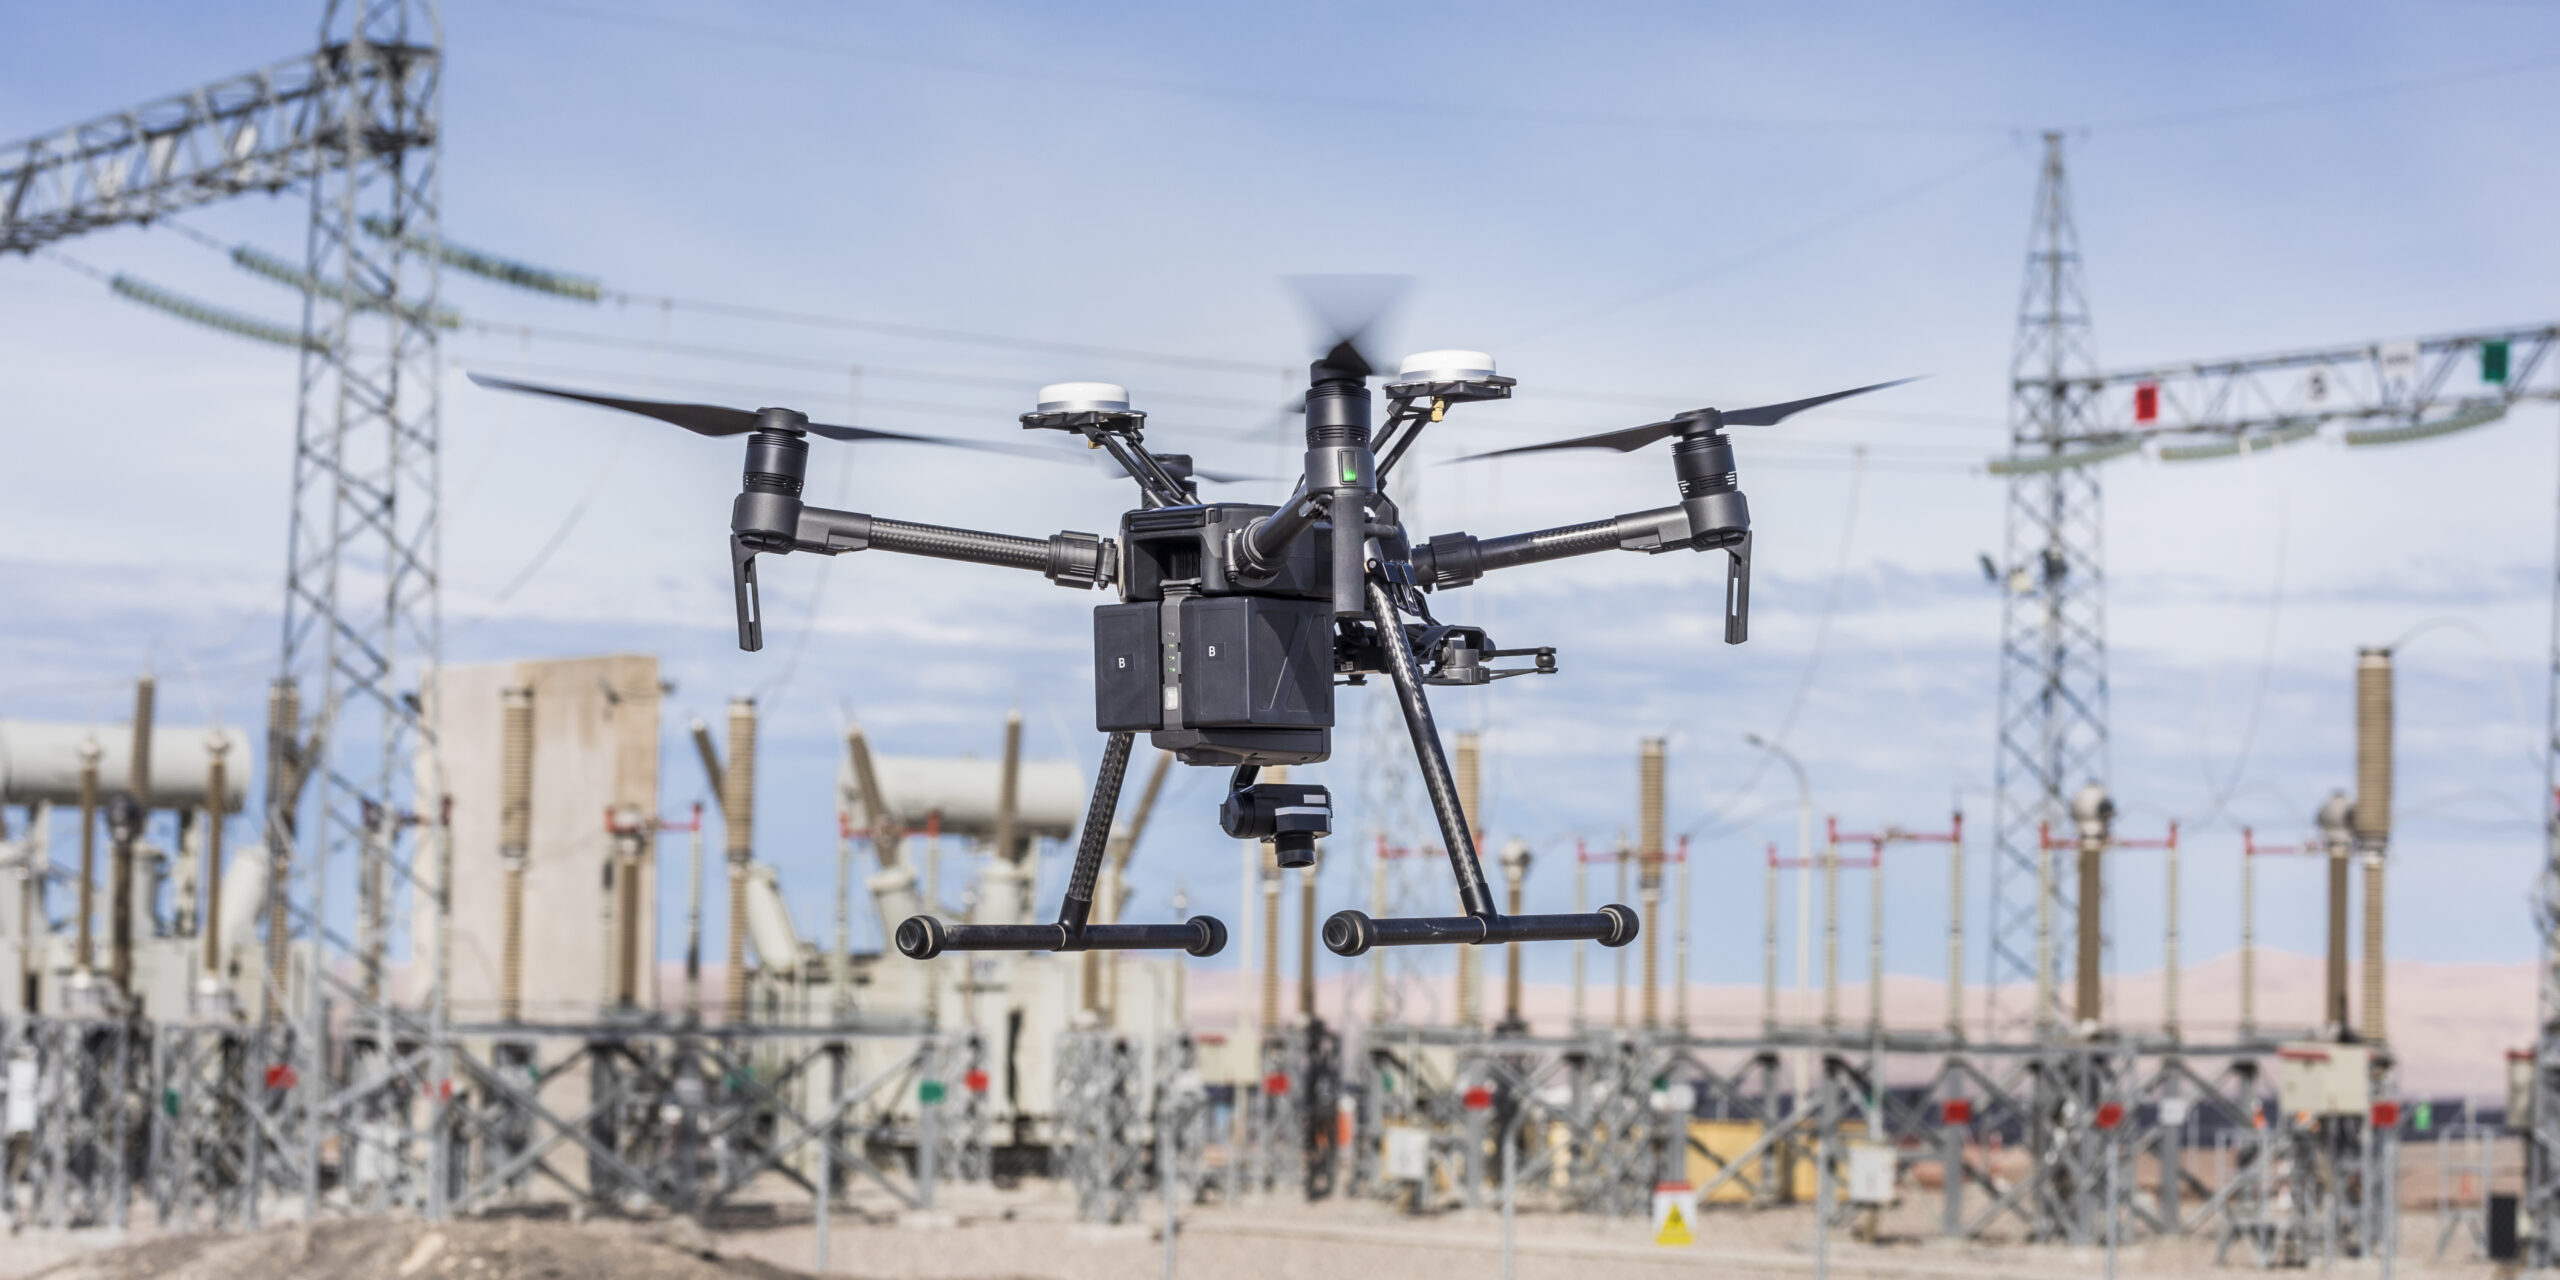 New technology: The vampire drone absorbs power from power lines